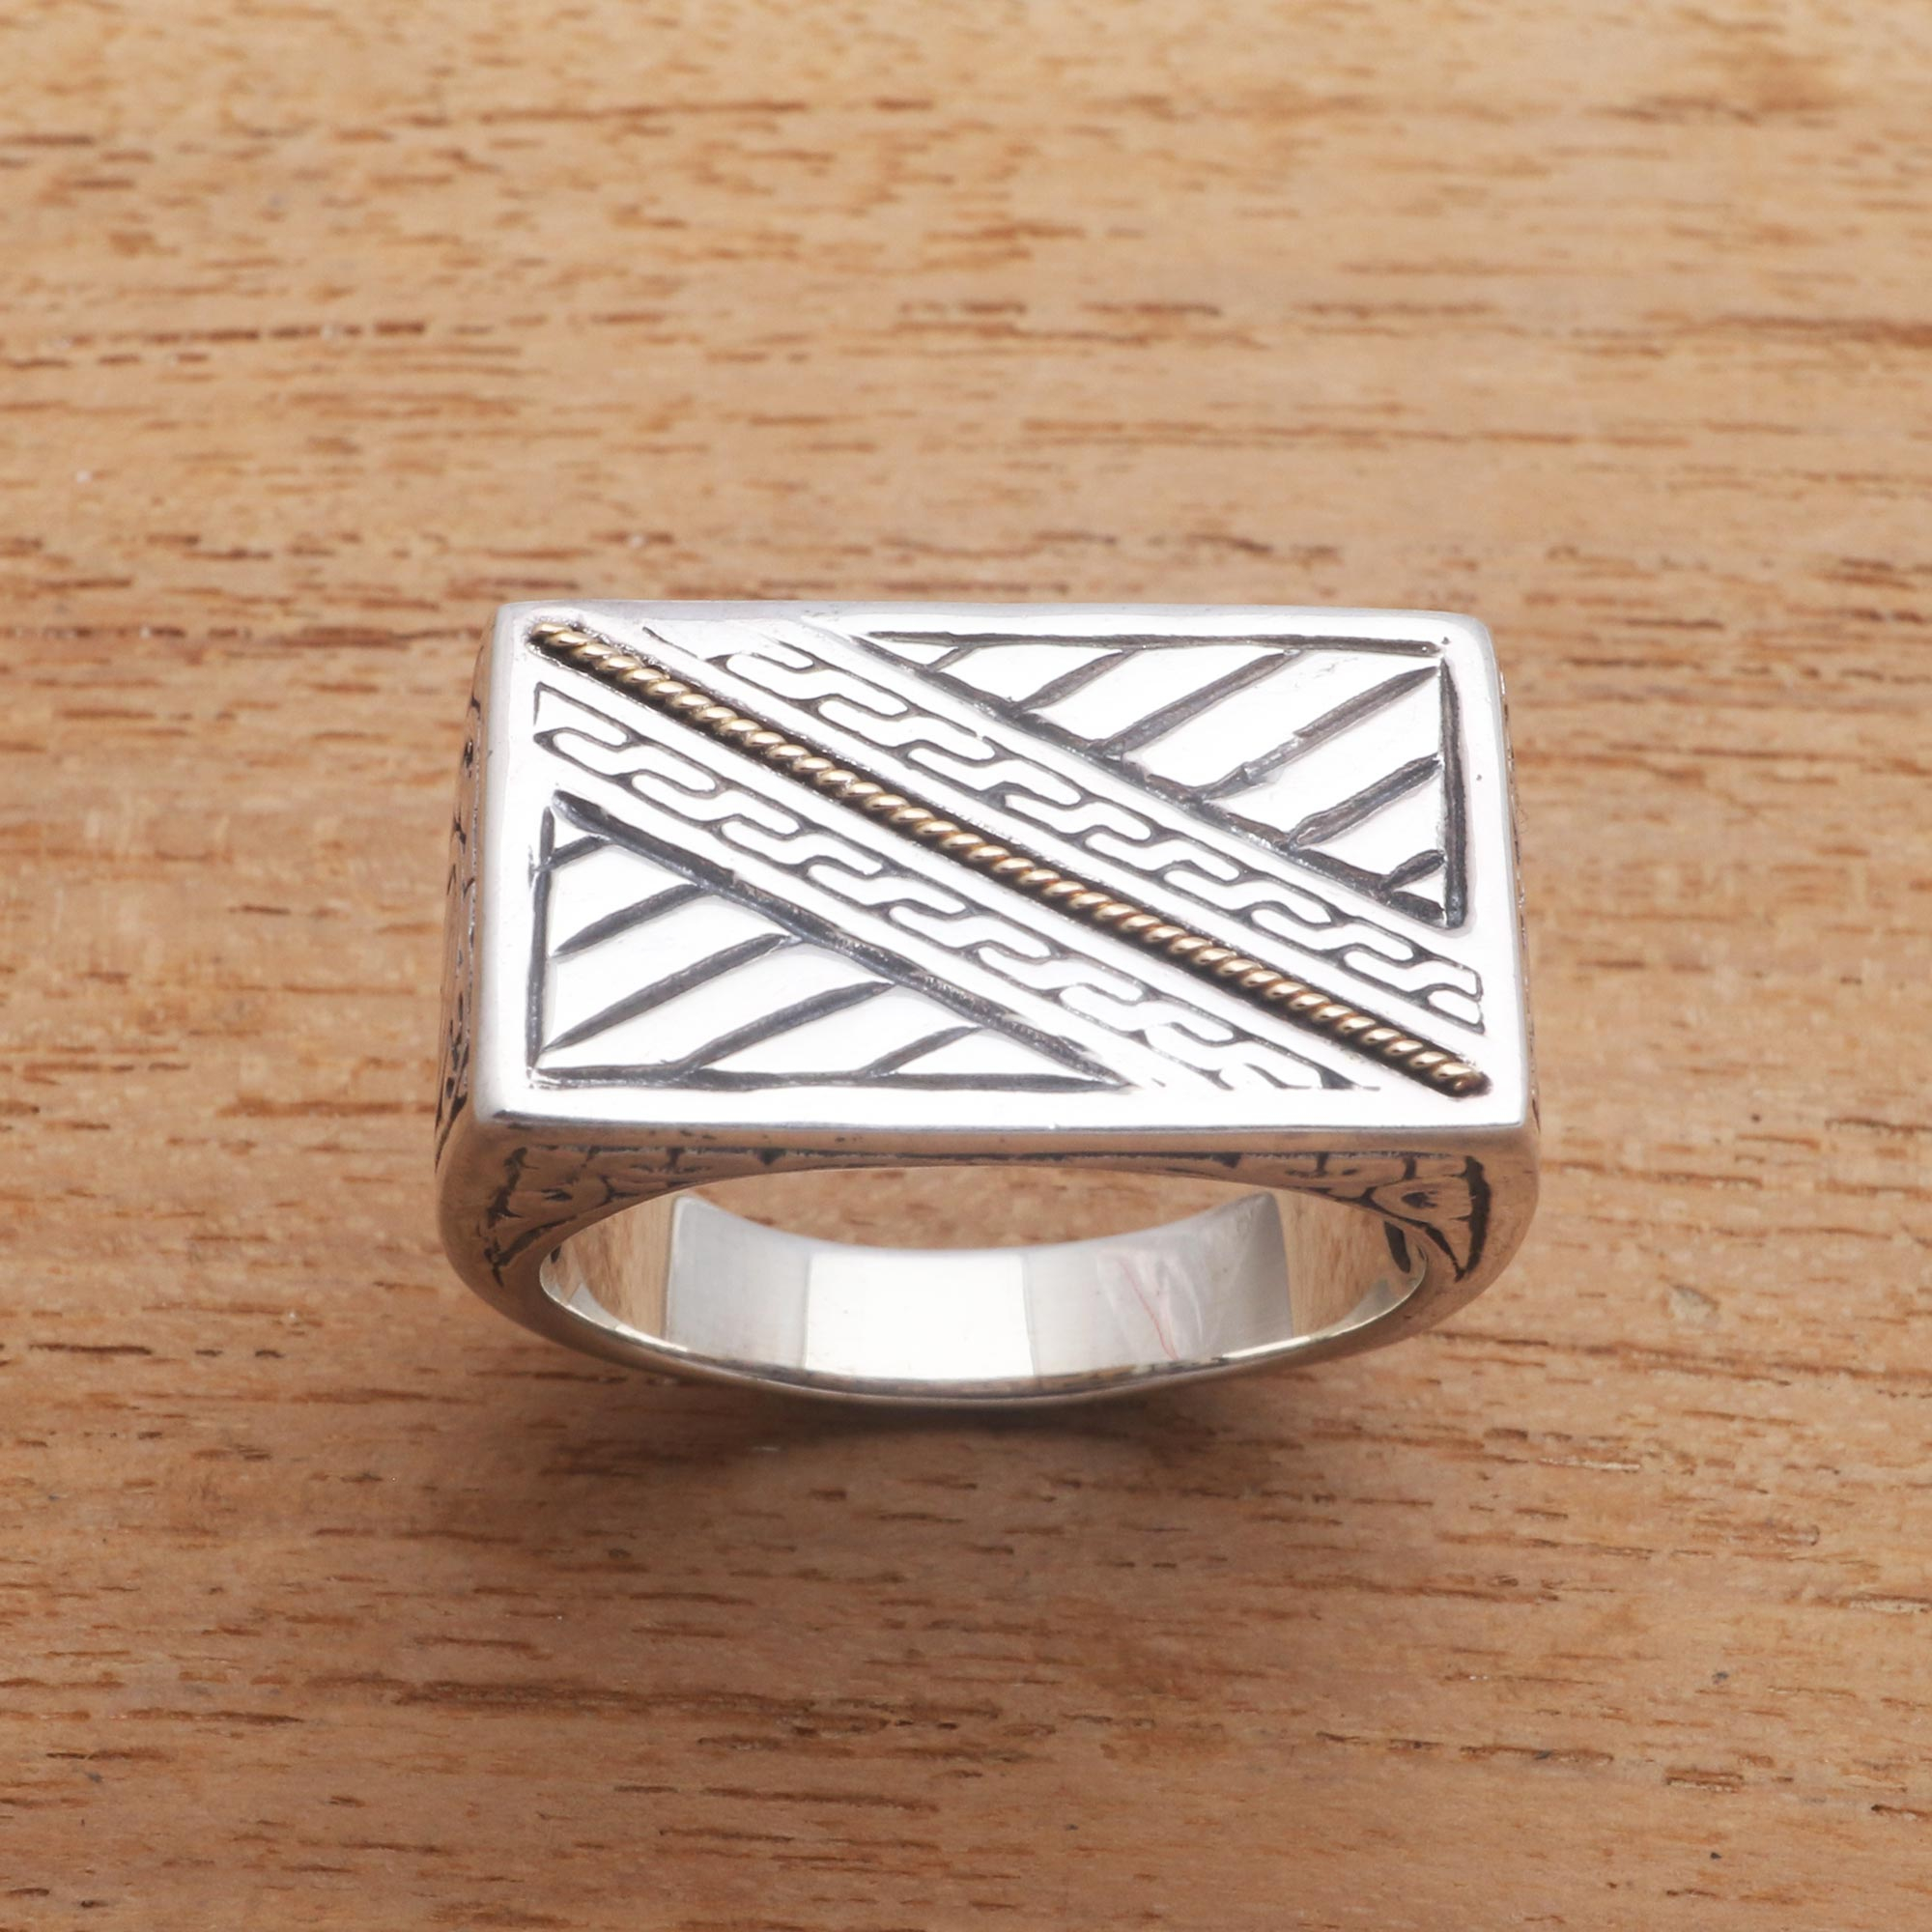 Patterned Gold Accented Sterling Silver Signet Ring, 'Divine Bridge'